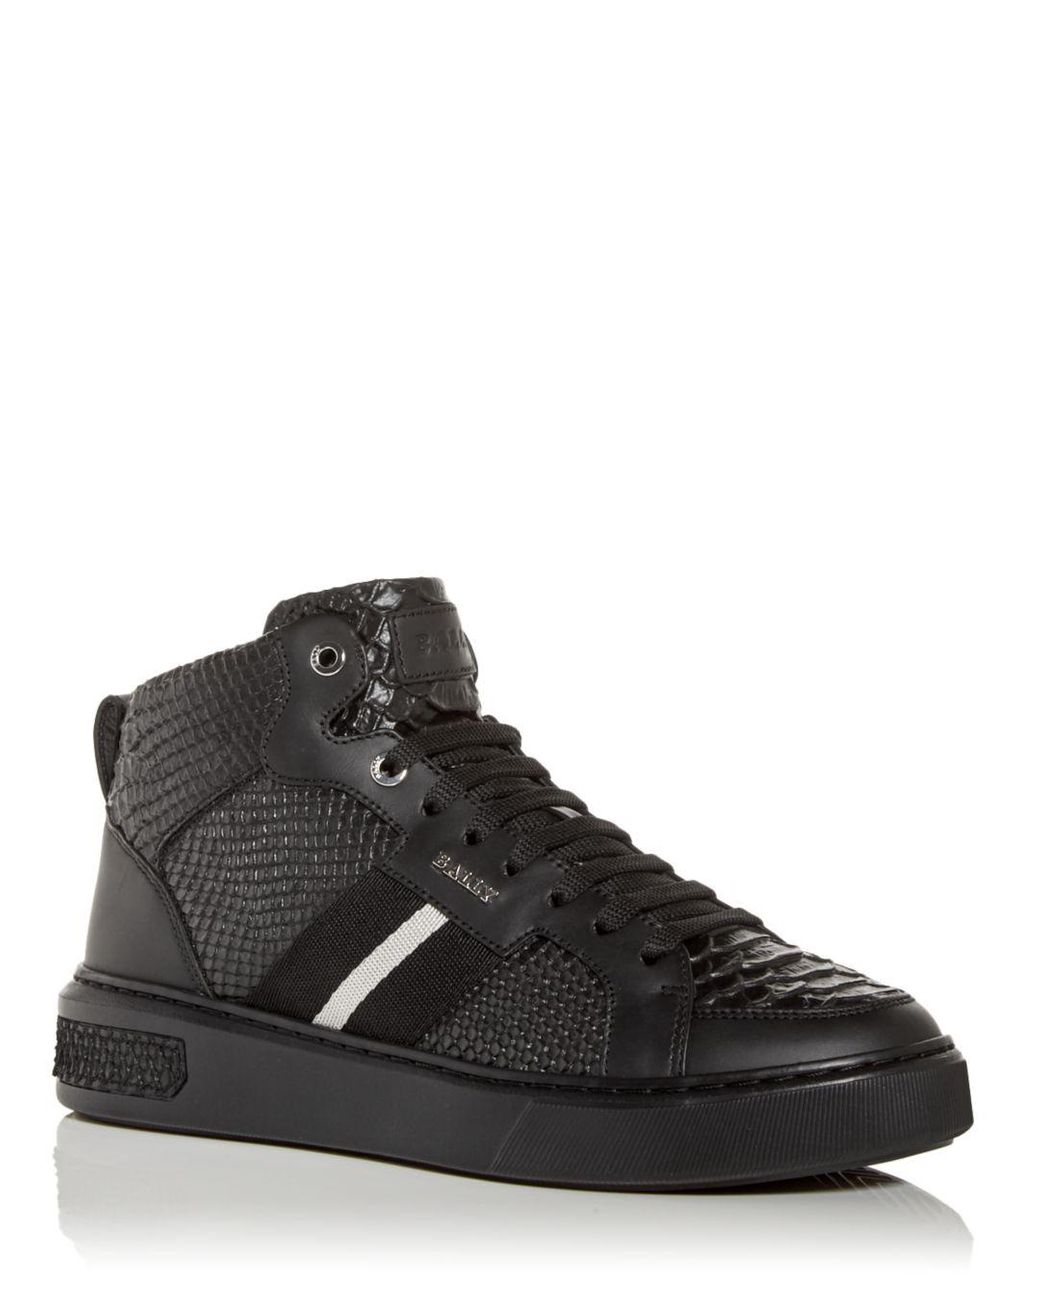 Bally Leather Myles High Top Sneakers in Black Snake (Black) for Men - Lyst